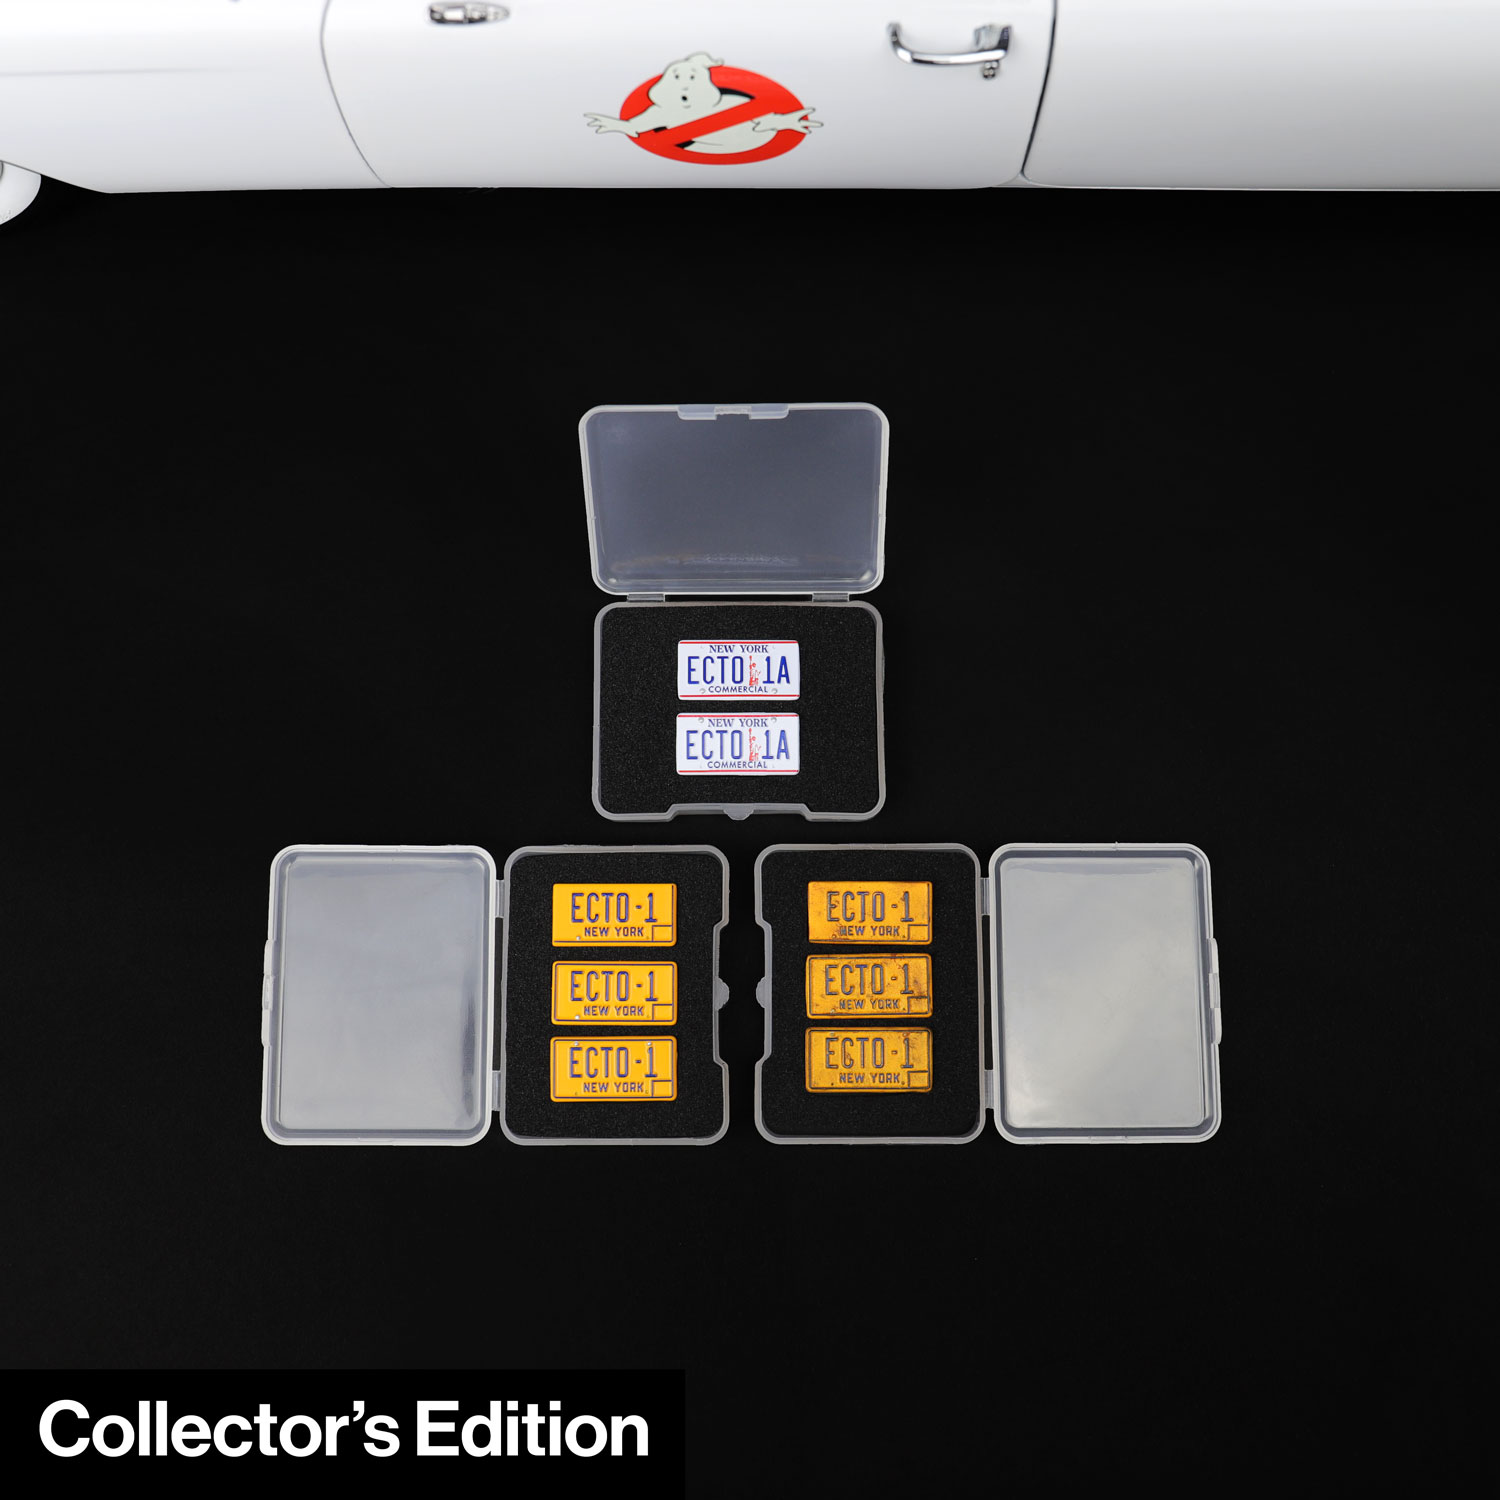 Collector's Edition of Ecto-1 Magnetic Die-cast Licence Plates mod